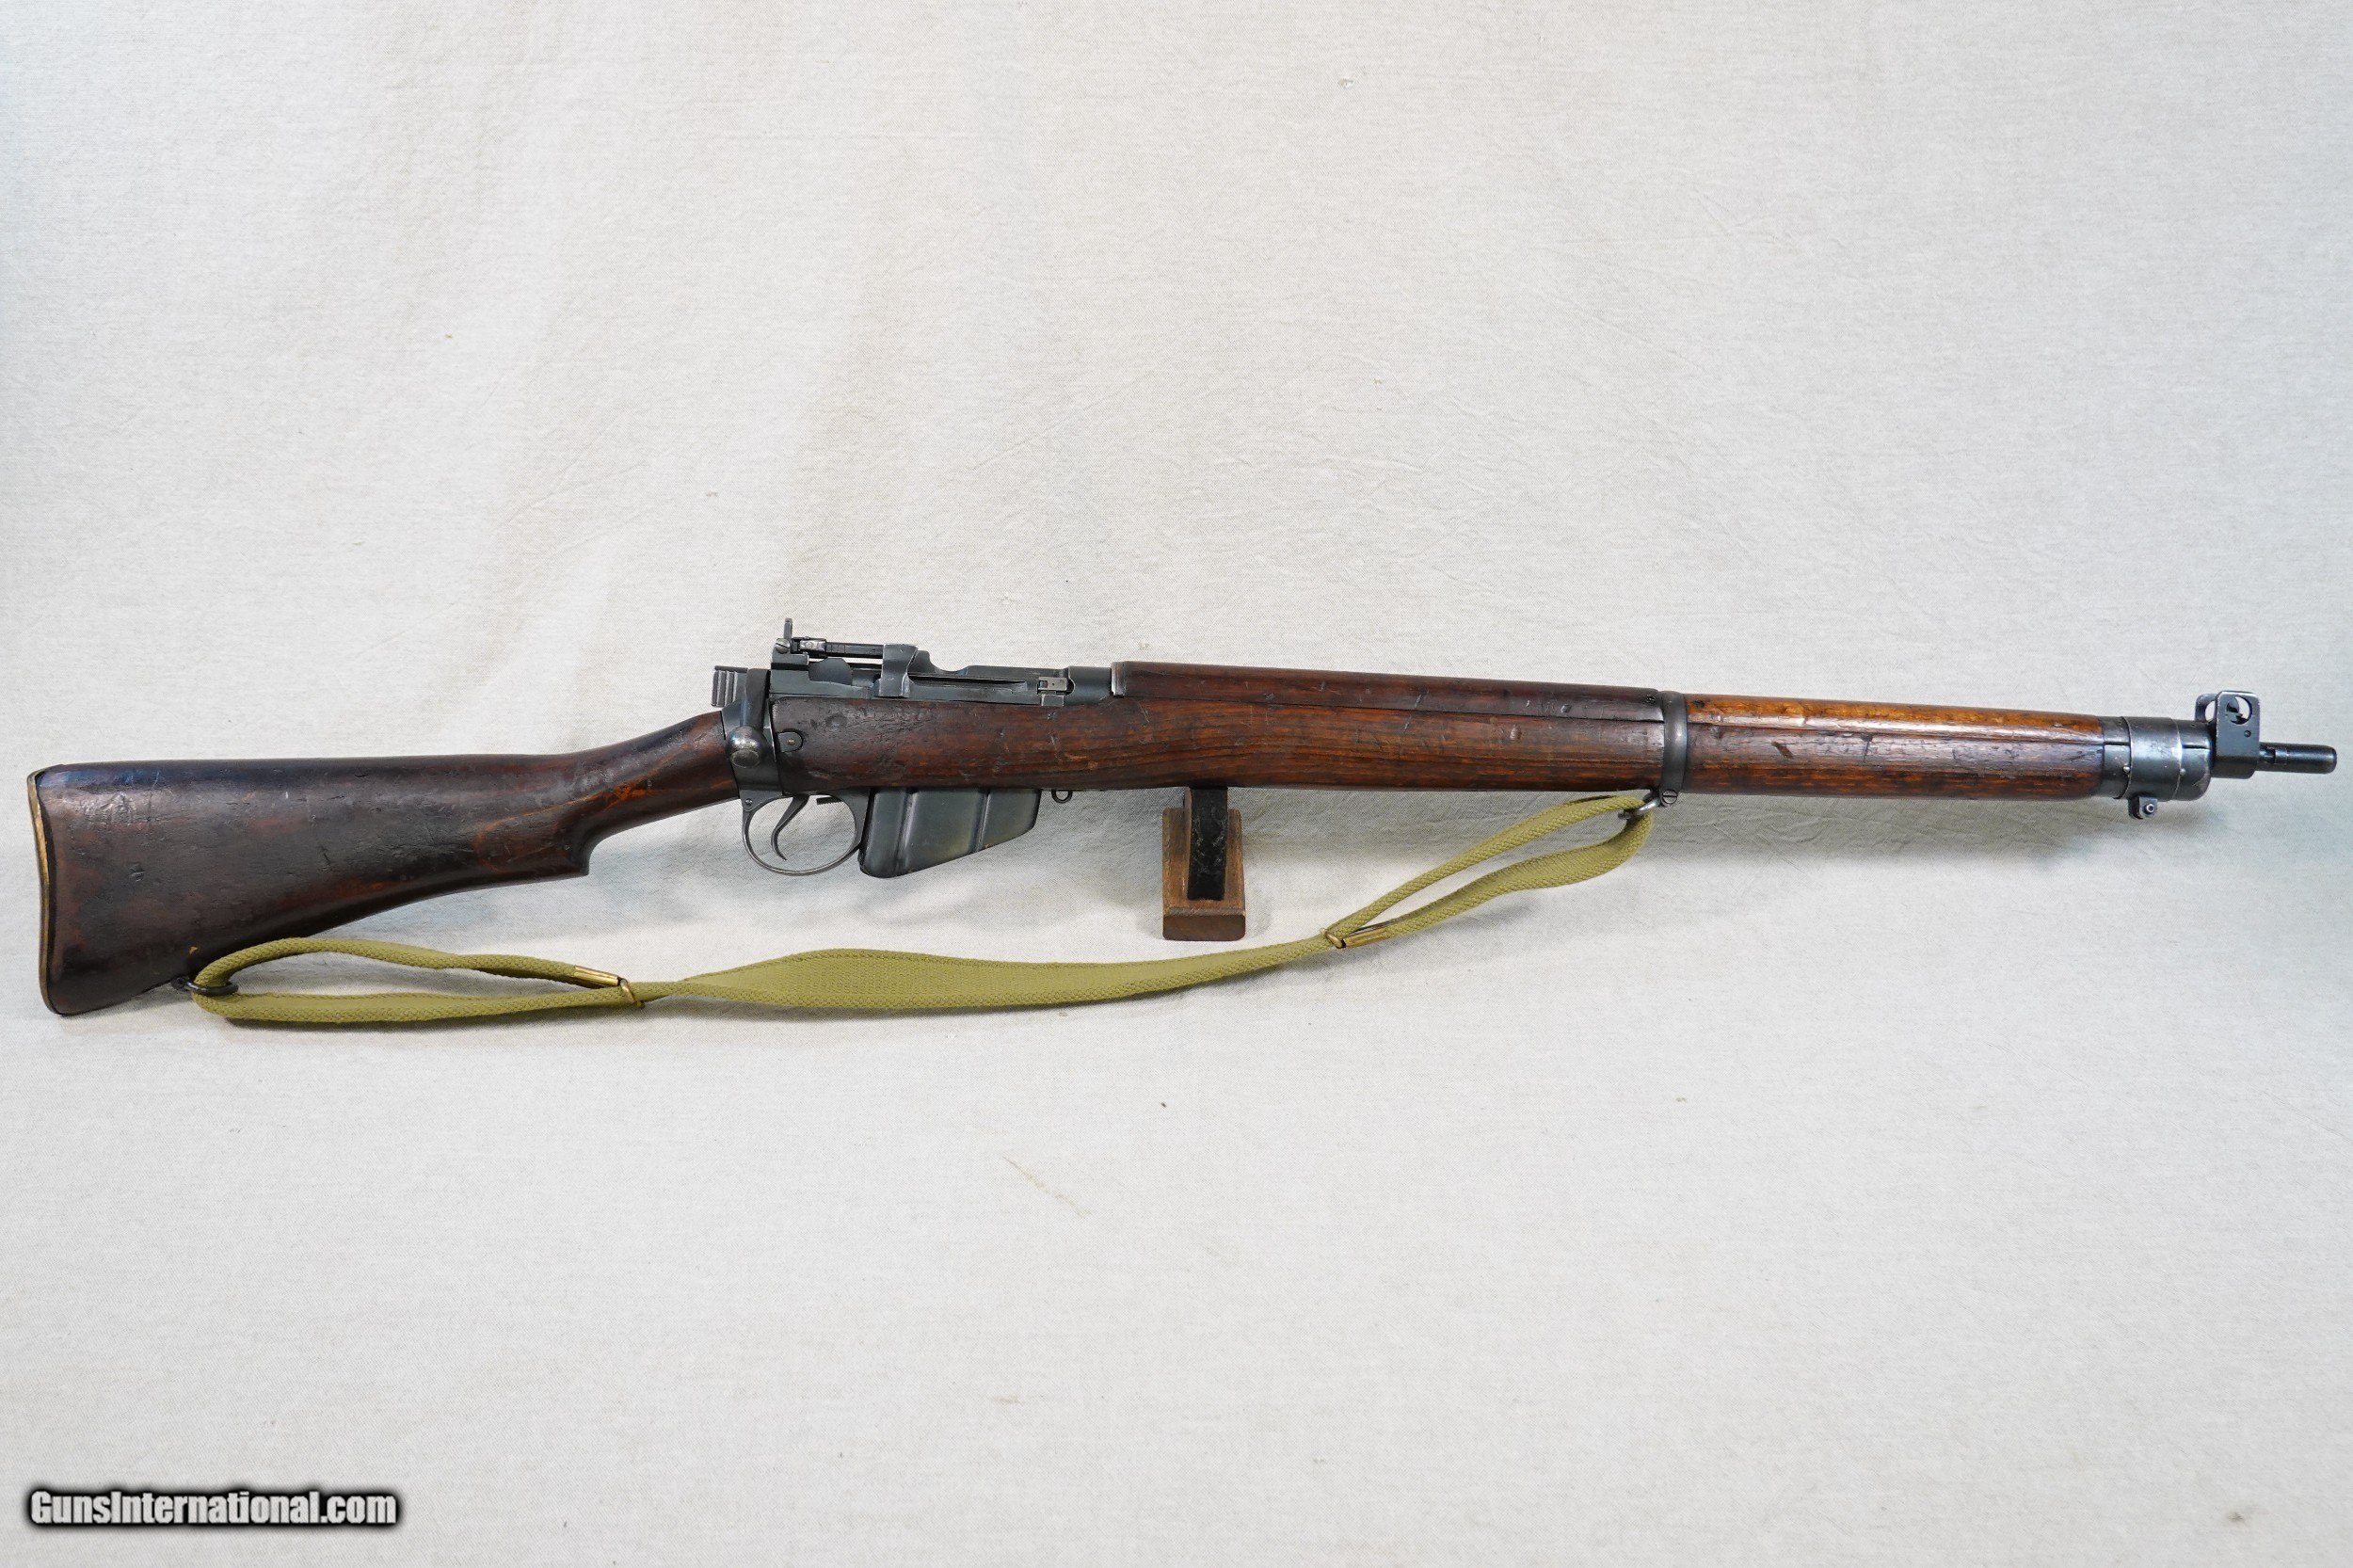 WWII Long Branch Enfield No 4 Mk I .303 Rifle Auctions